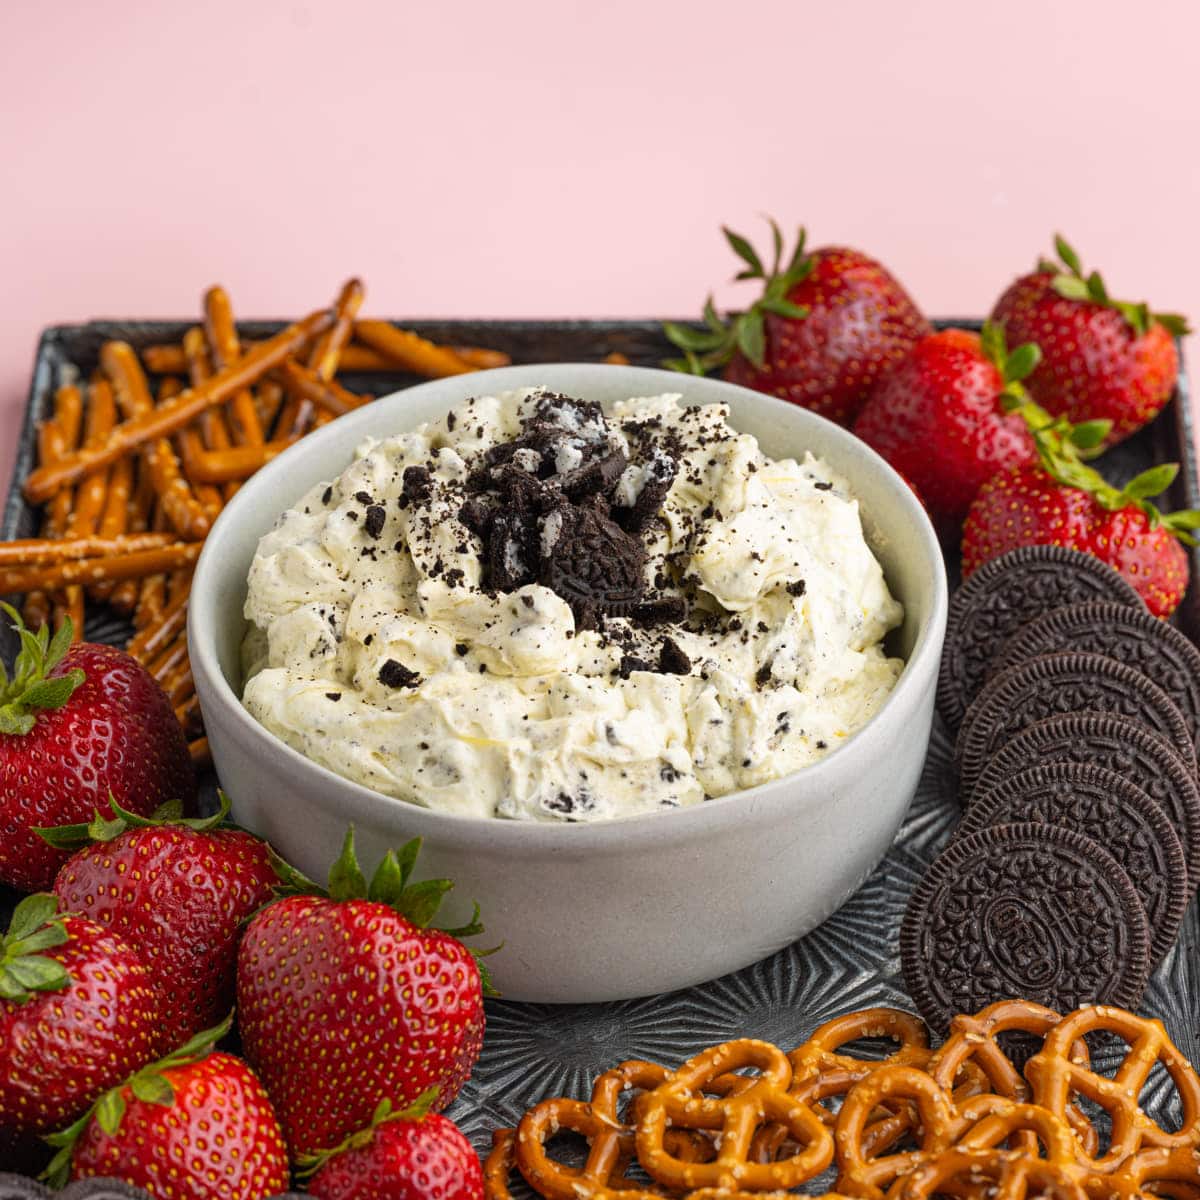 Oreo Dip served with strawberries and pretzels